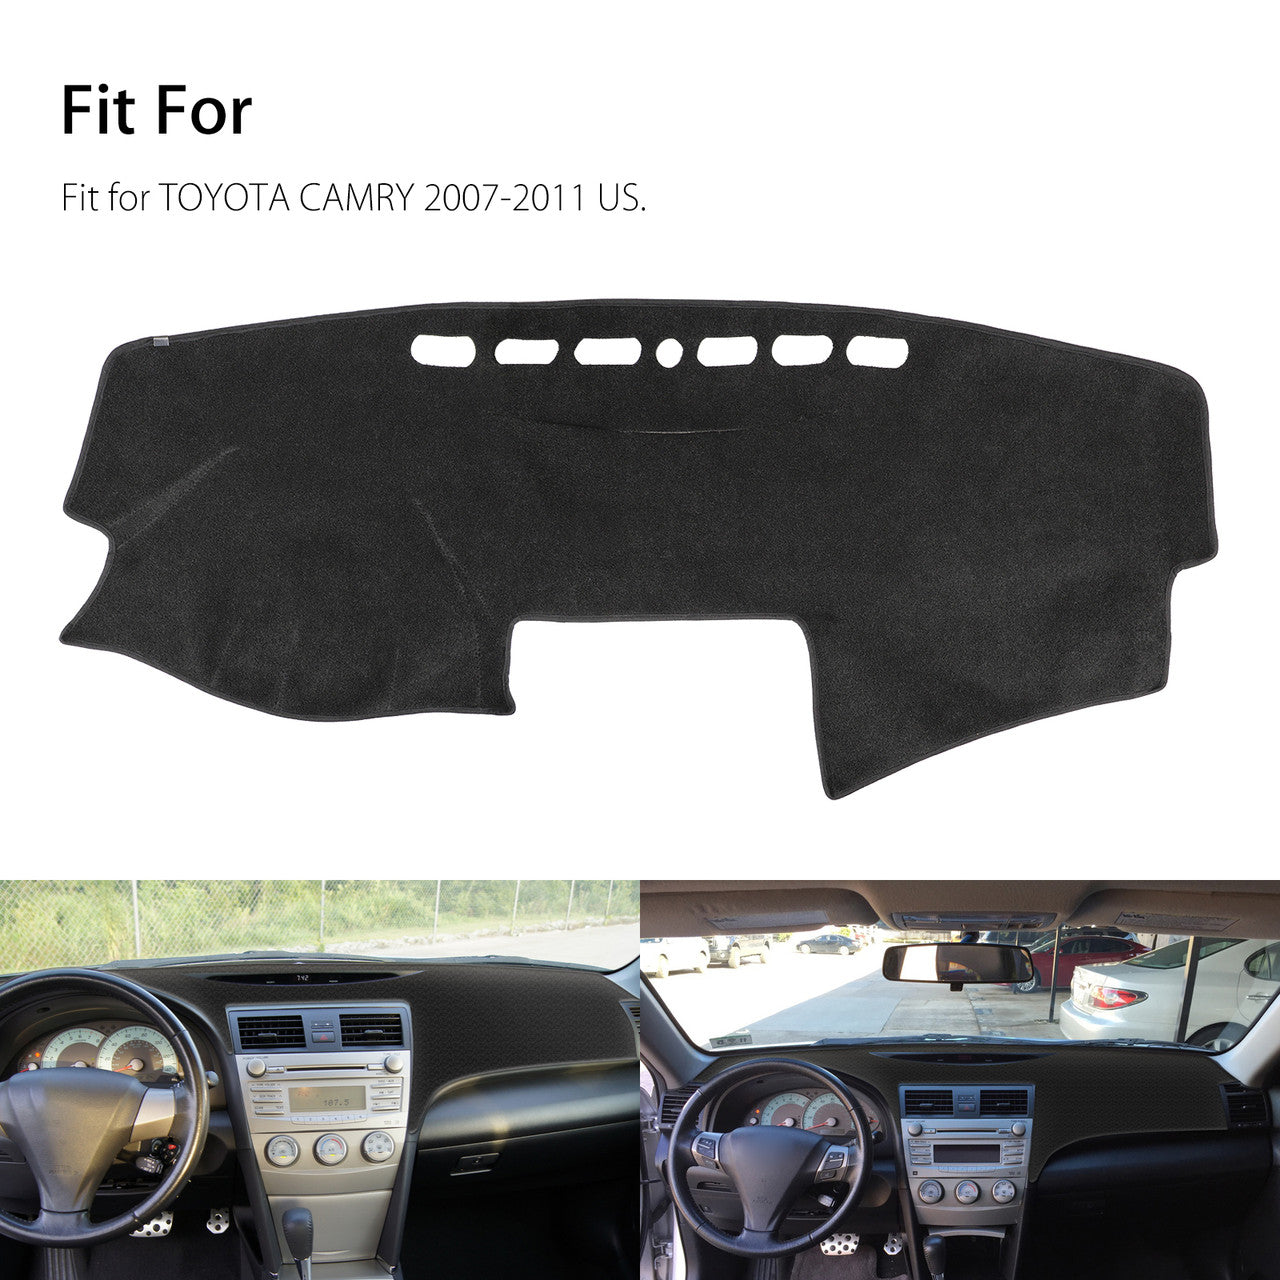 Black Carpet Dashboard Cover, Fit For 2007-2011 Toyota Camry, Custom Fit Dash Cover, Easy Installation